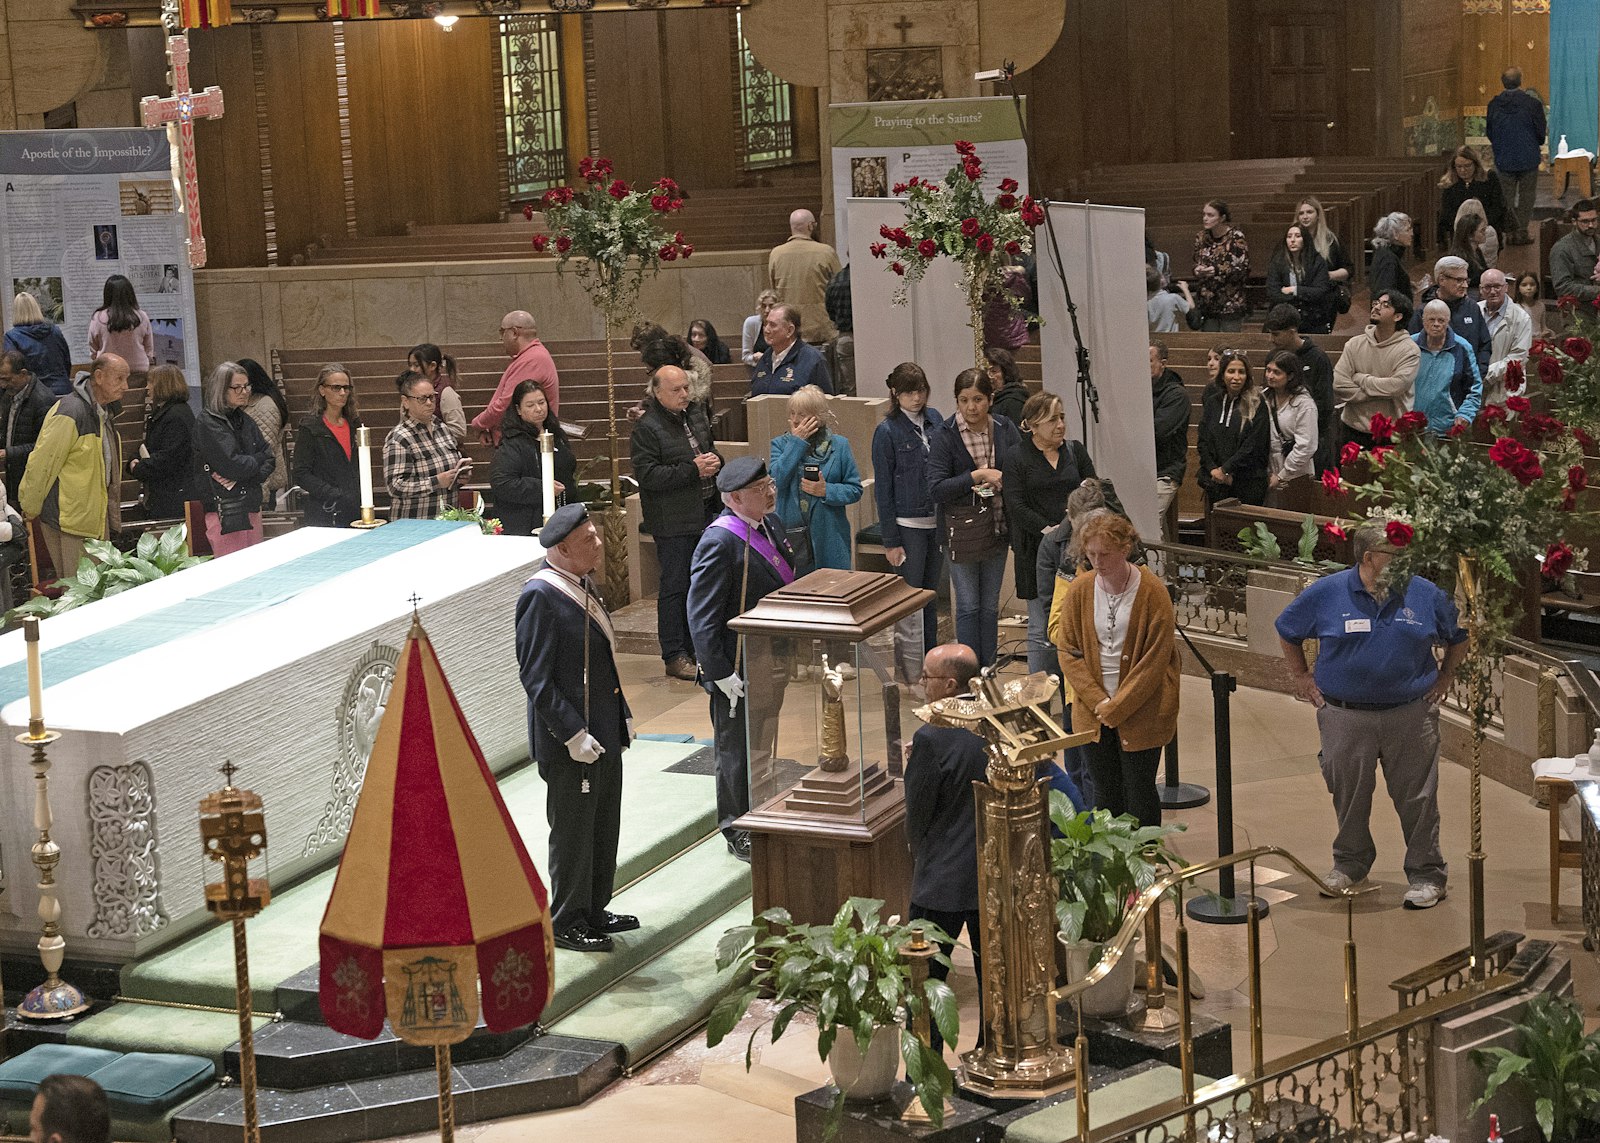 A line snakes around the National Shrine of the Little Flower Basilica as Catholics from across southeast Michigan gathered for a rare chance to pray with a relic of one of Christ's twelve apostles.